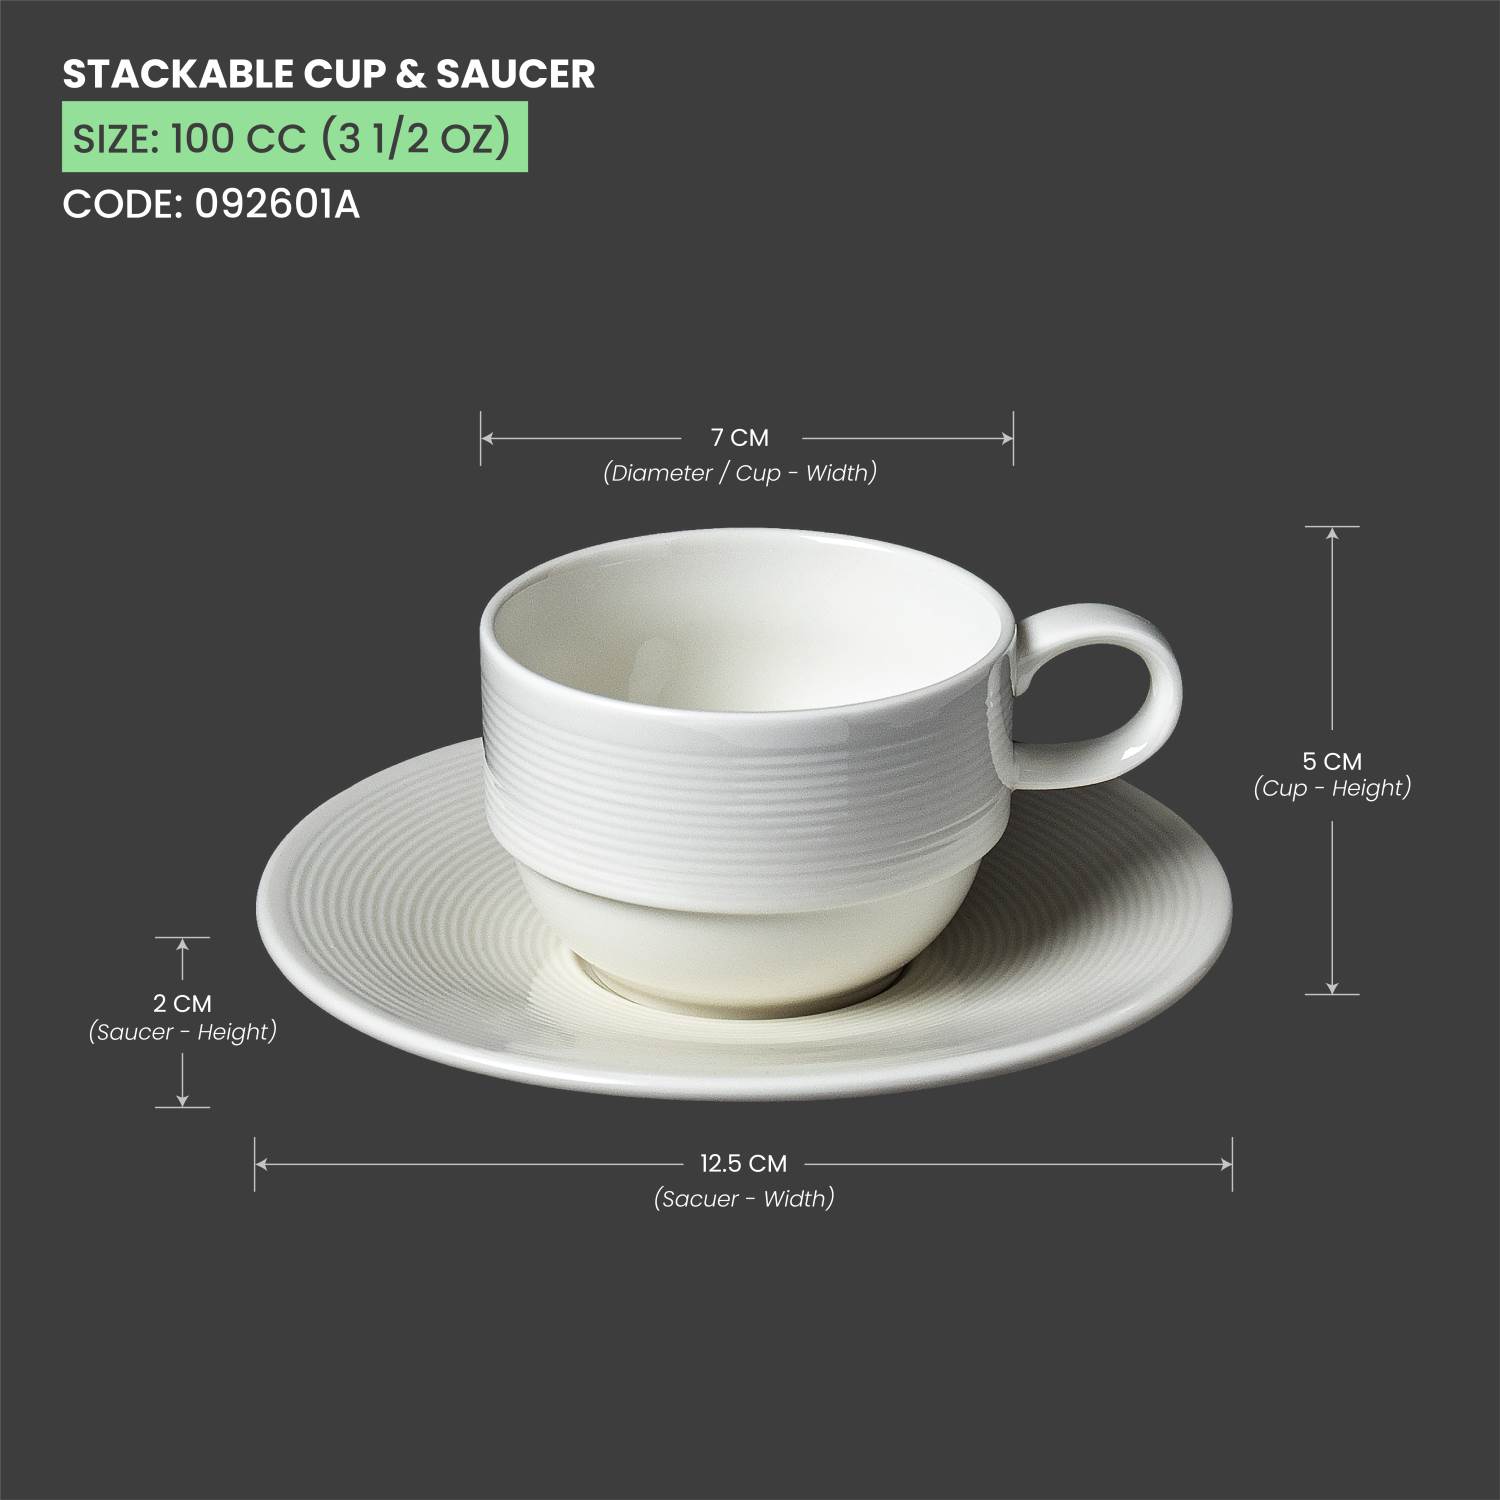 Baralee Wish Stackable Cup 100 Cc (3 1/2 Oz)